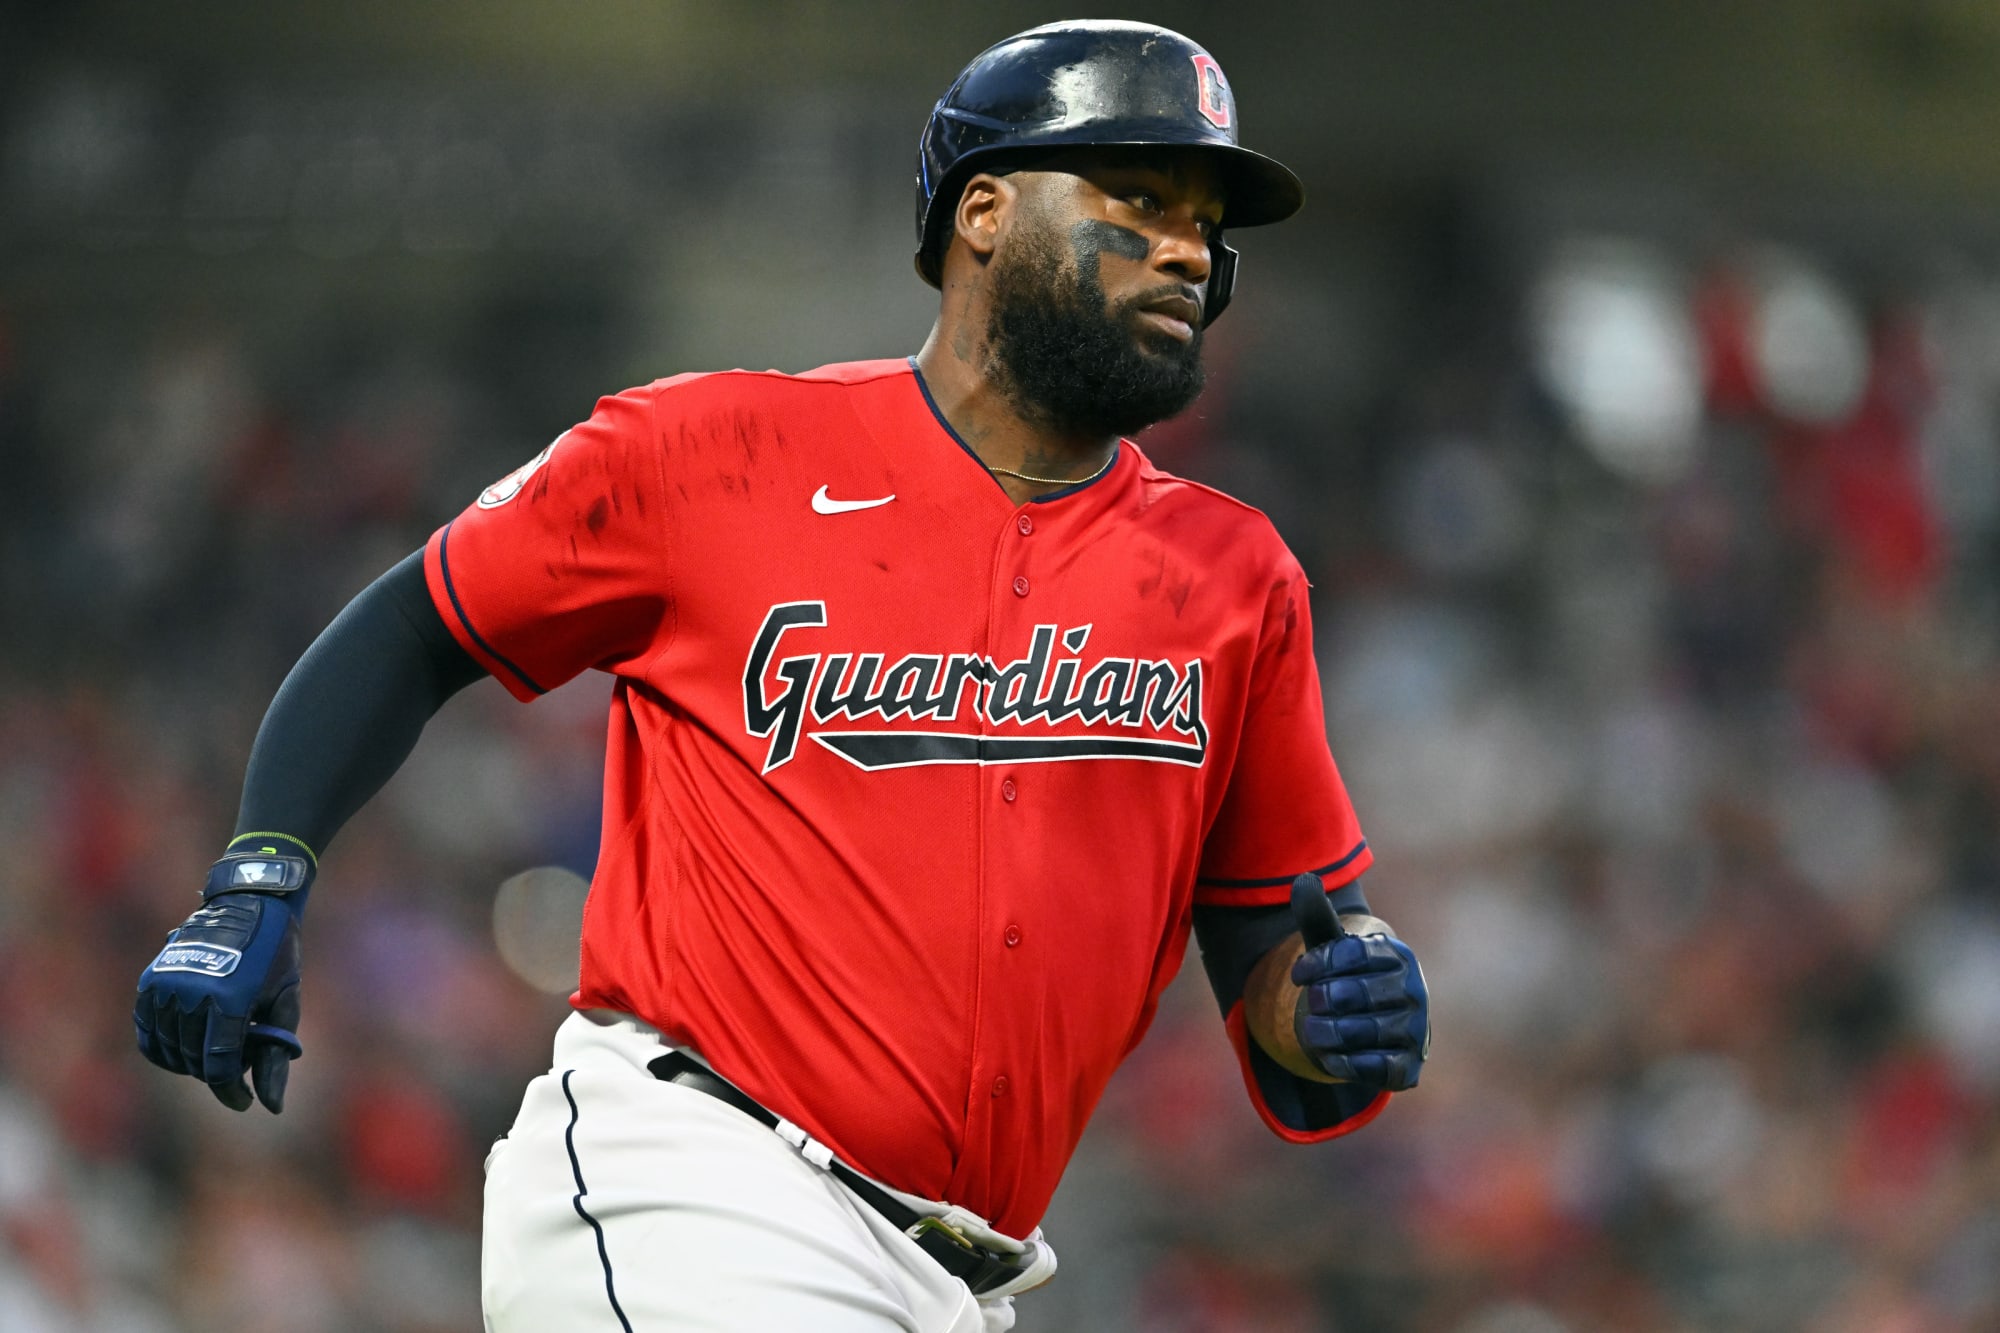 The Colorado Rockies should take a flier on outfielder Franmil Reyes